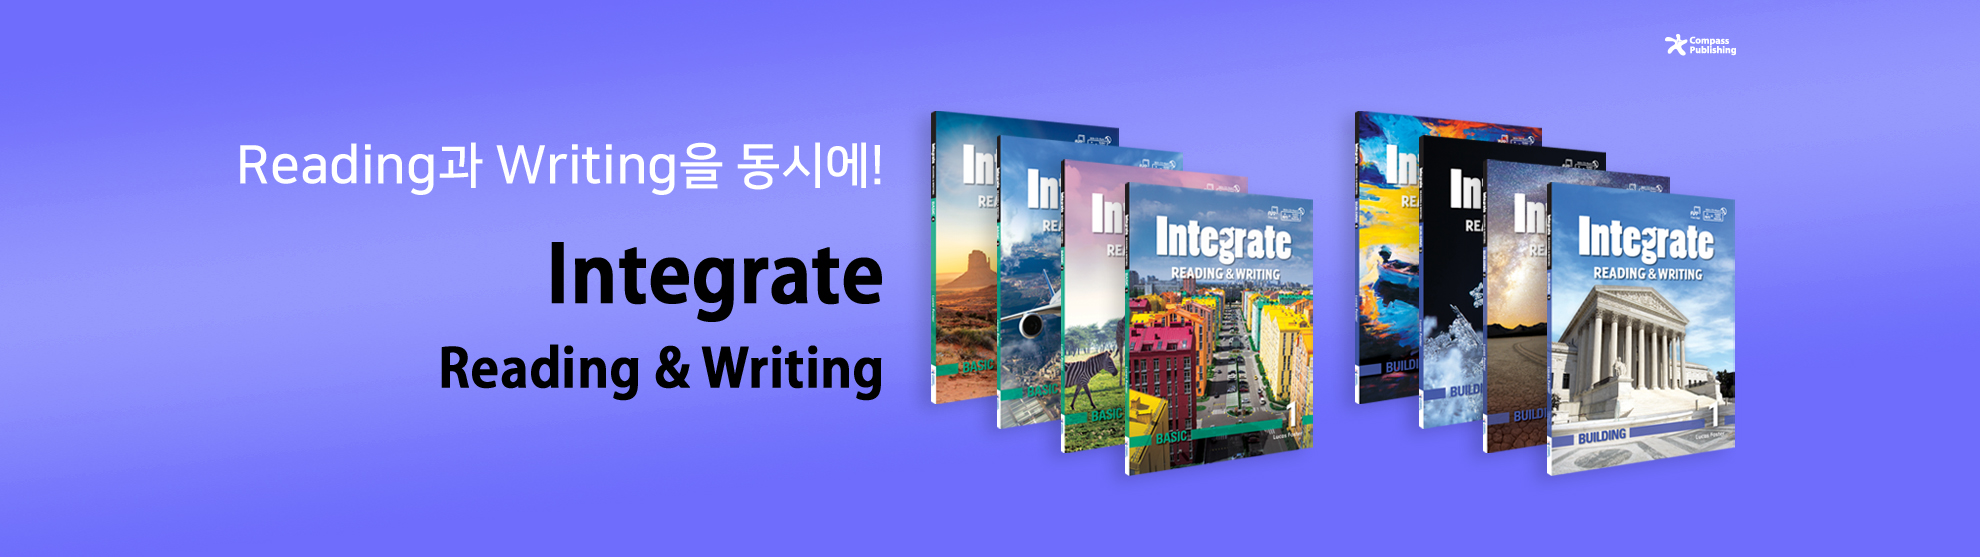 integrate reading & writing